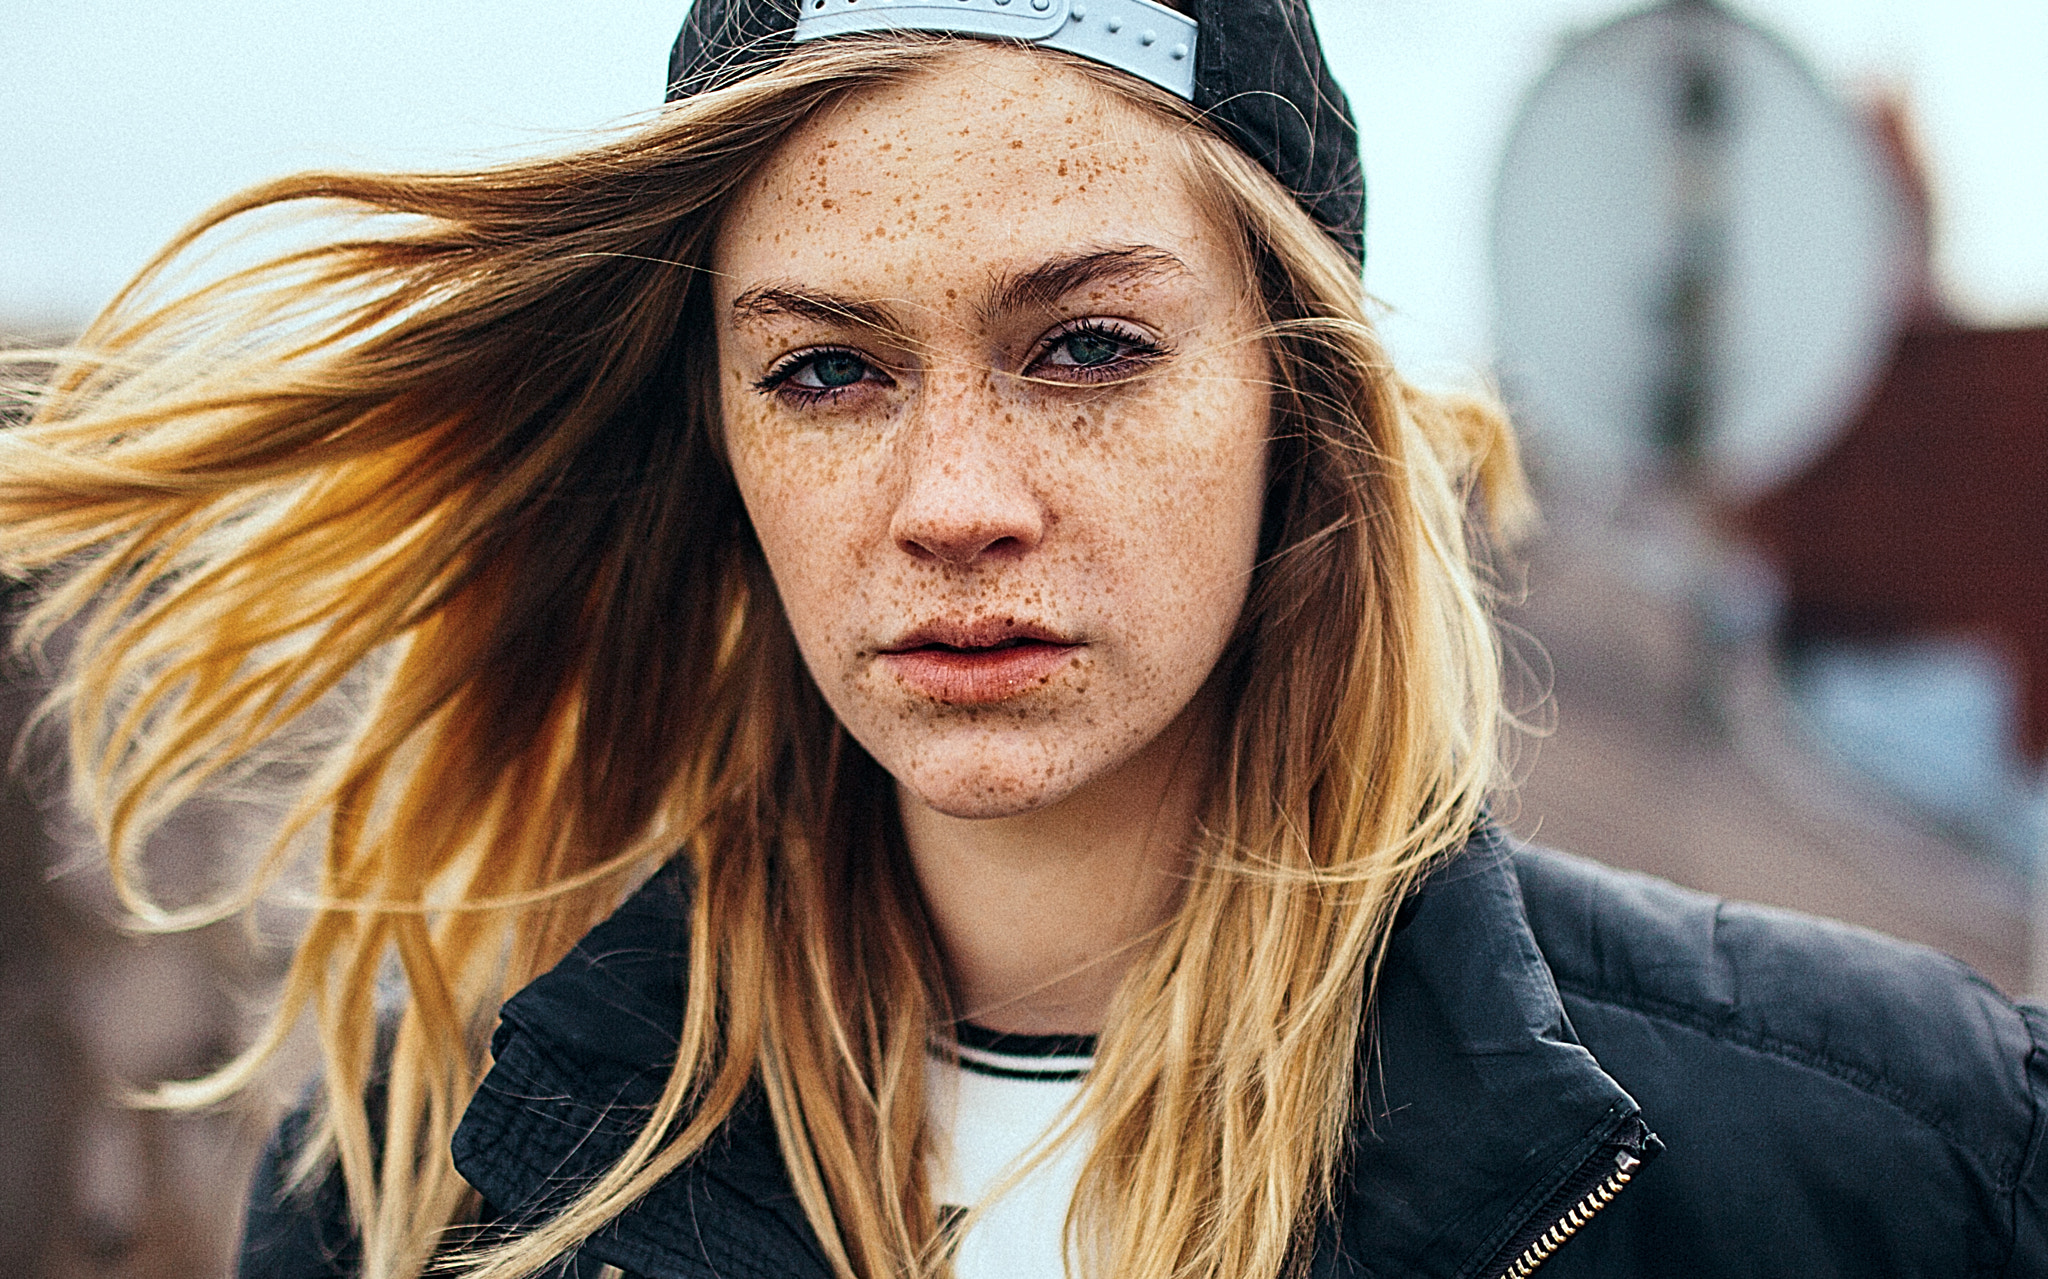 Women Blonde Blue Eyes Baseball Caps Open Mouth Freckles Looking At Viewer Andre Josselin 2048x1279